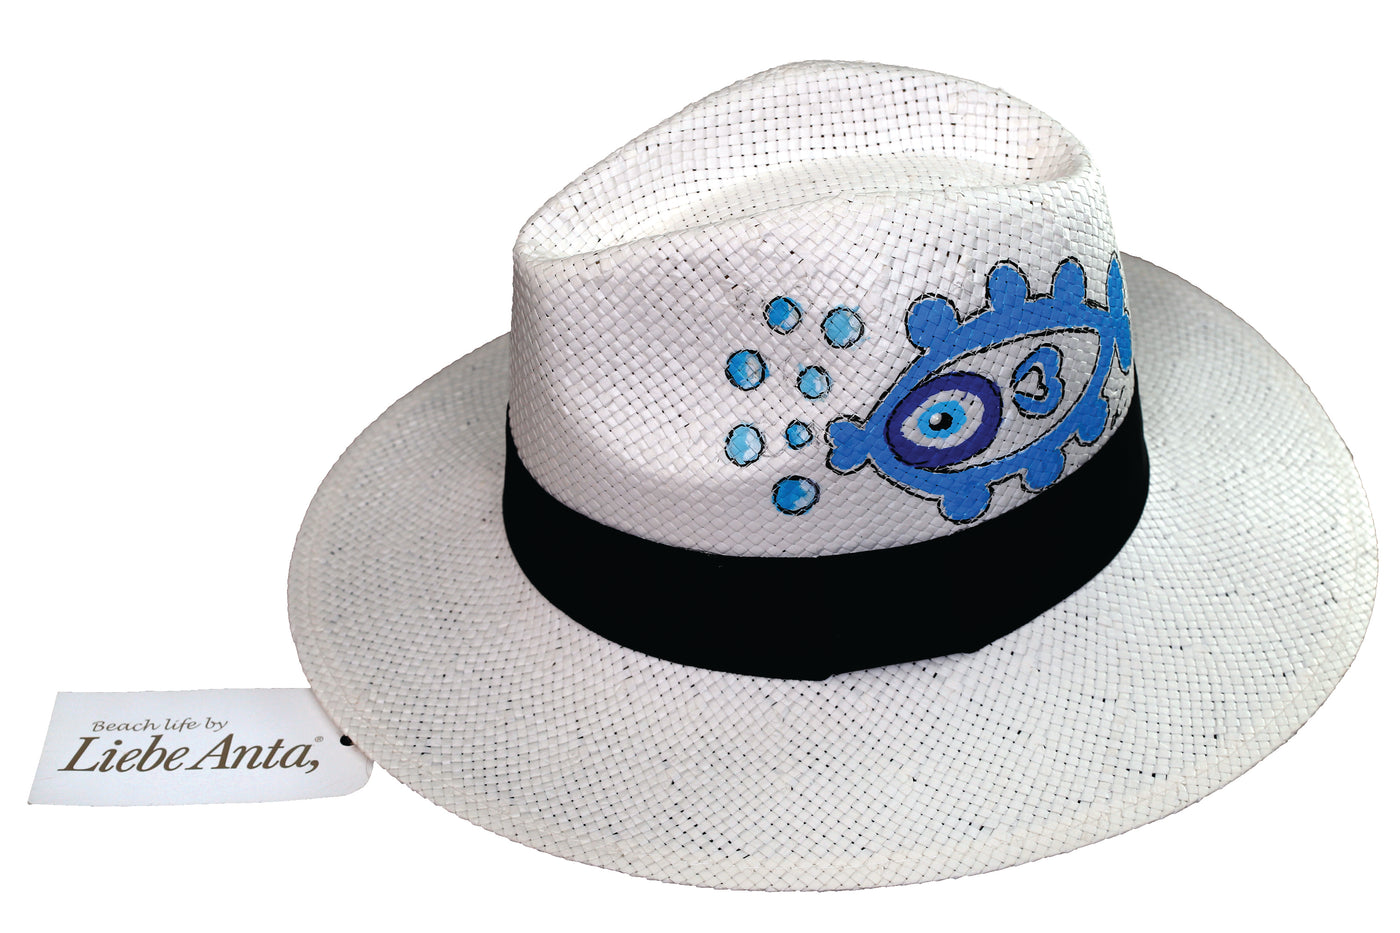 Liebe Anta Fish Blowing Bubbles Hat